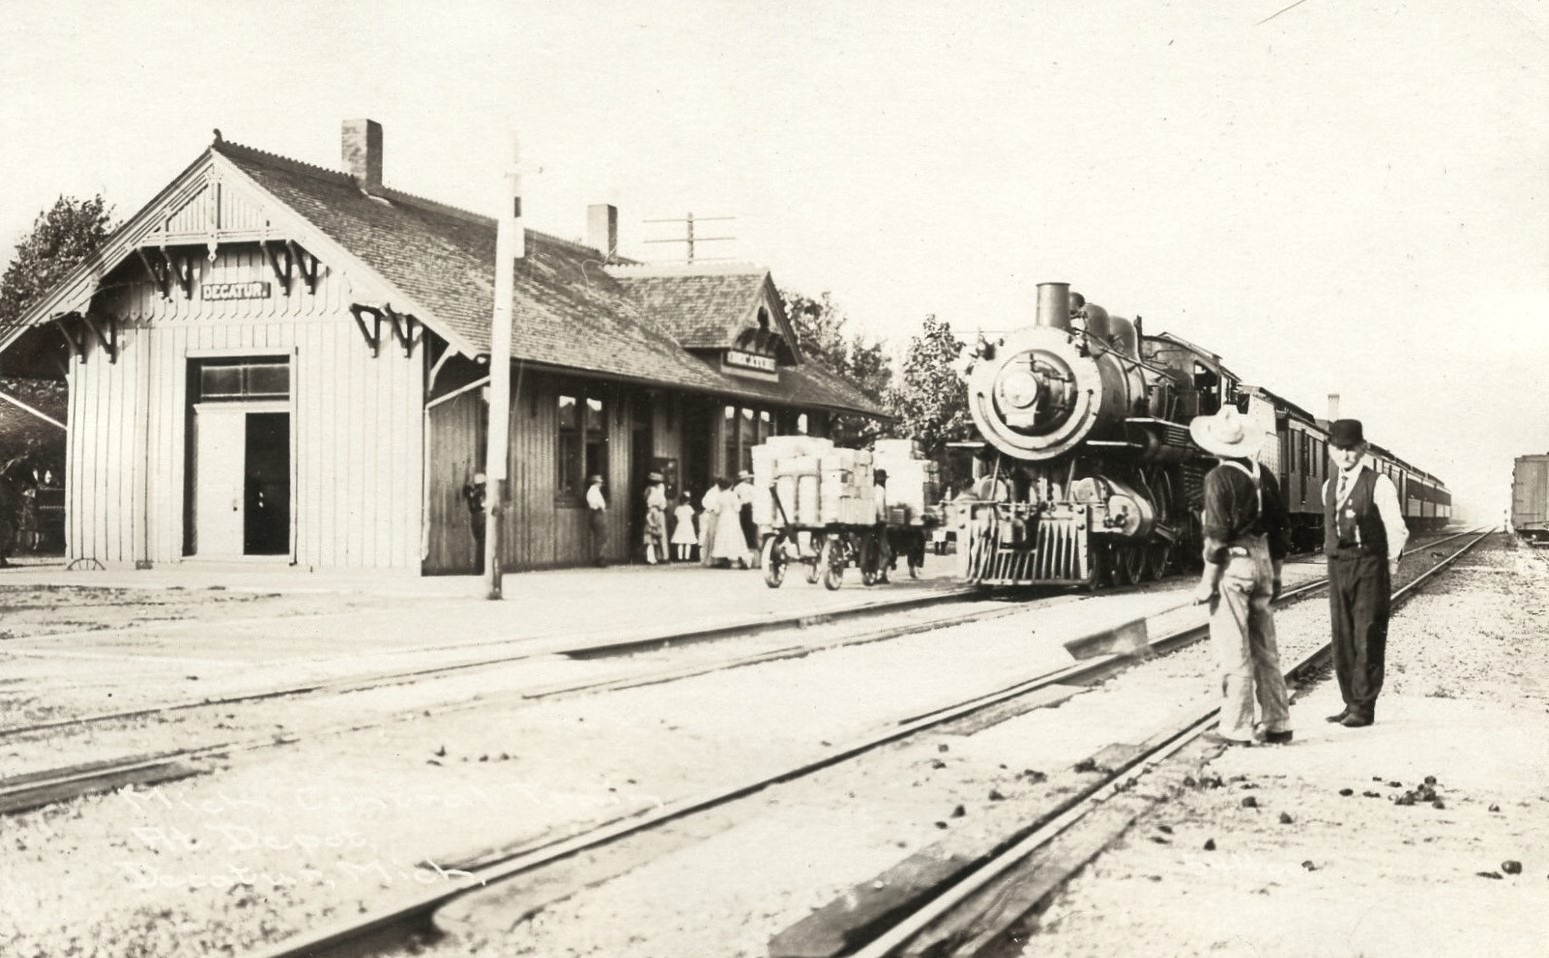 Decatur Depot and train